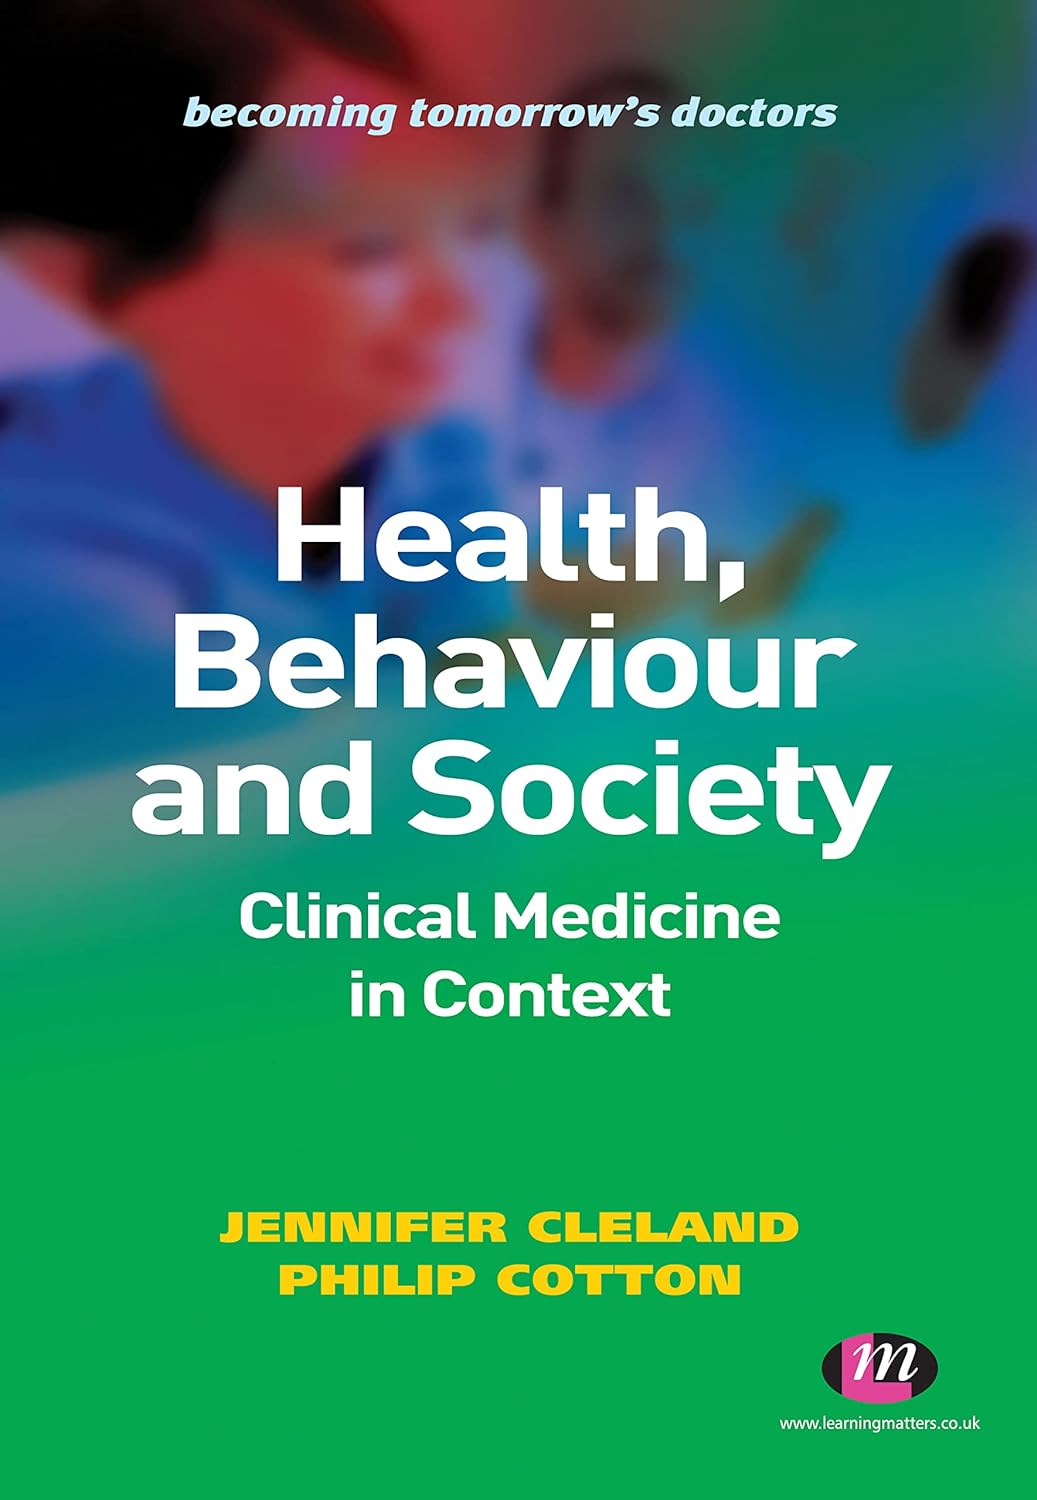 Health, Behaviour and Society: Clinical Medicine in Context (Becoming Tomorrow′s Doctors Series)  by Jennifer Cleland